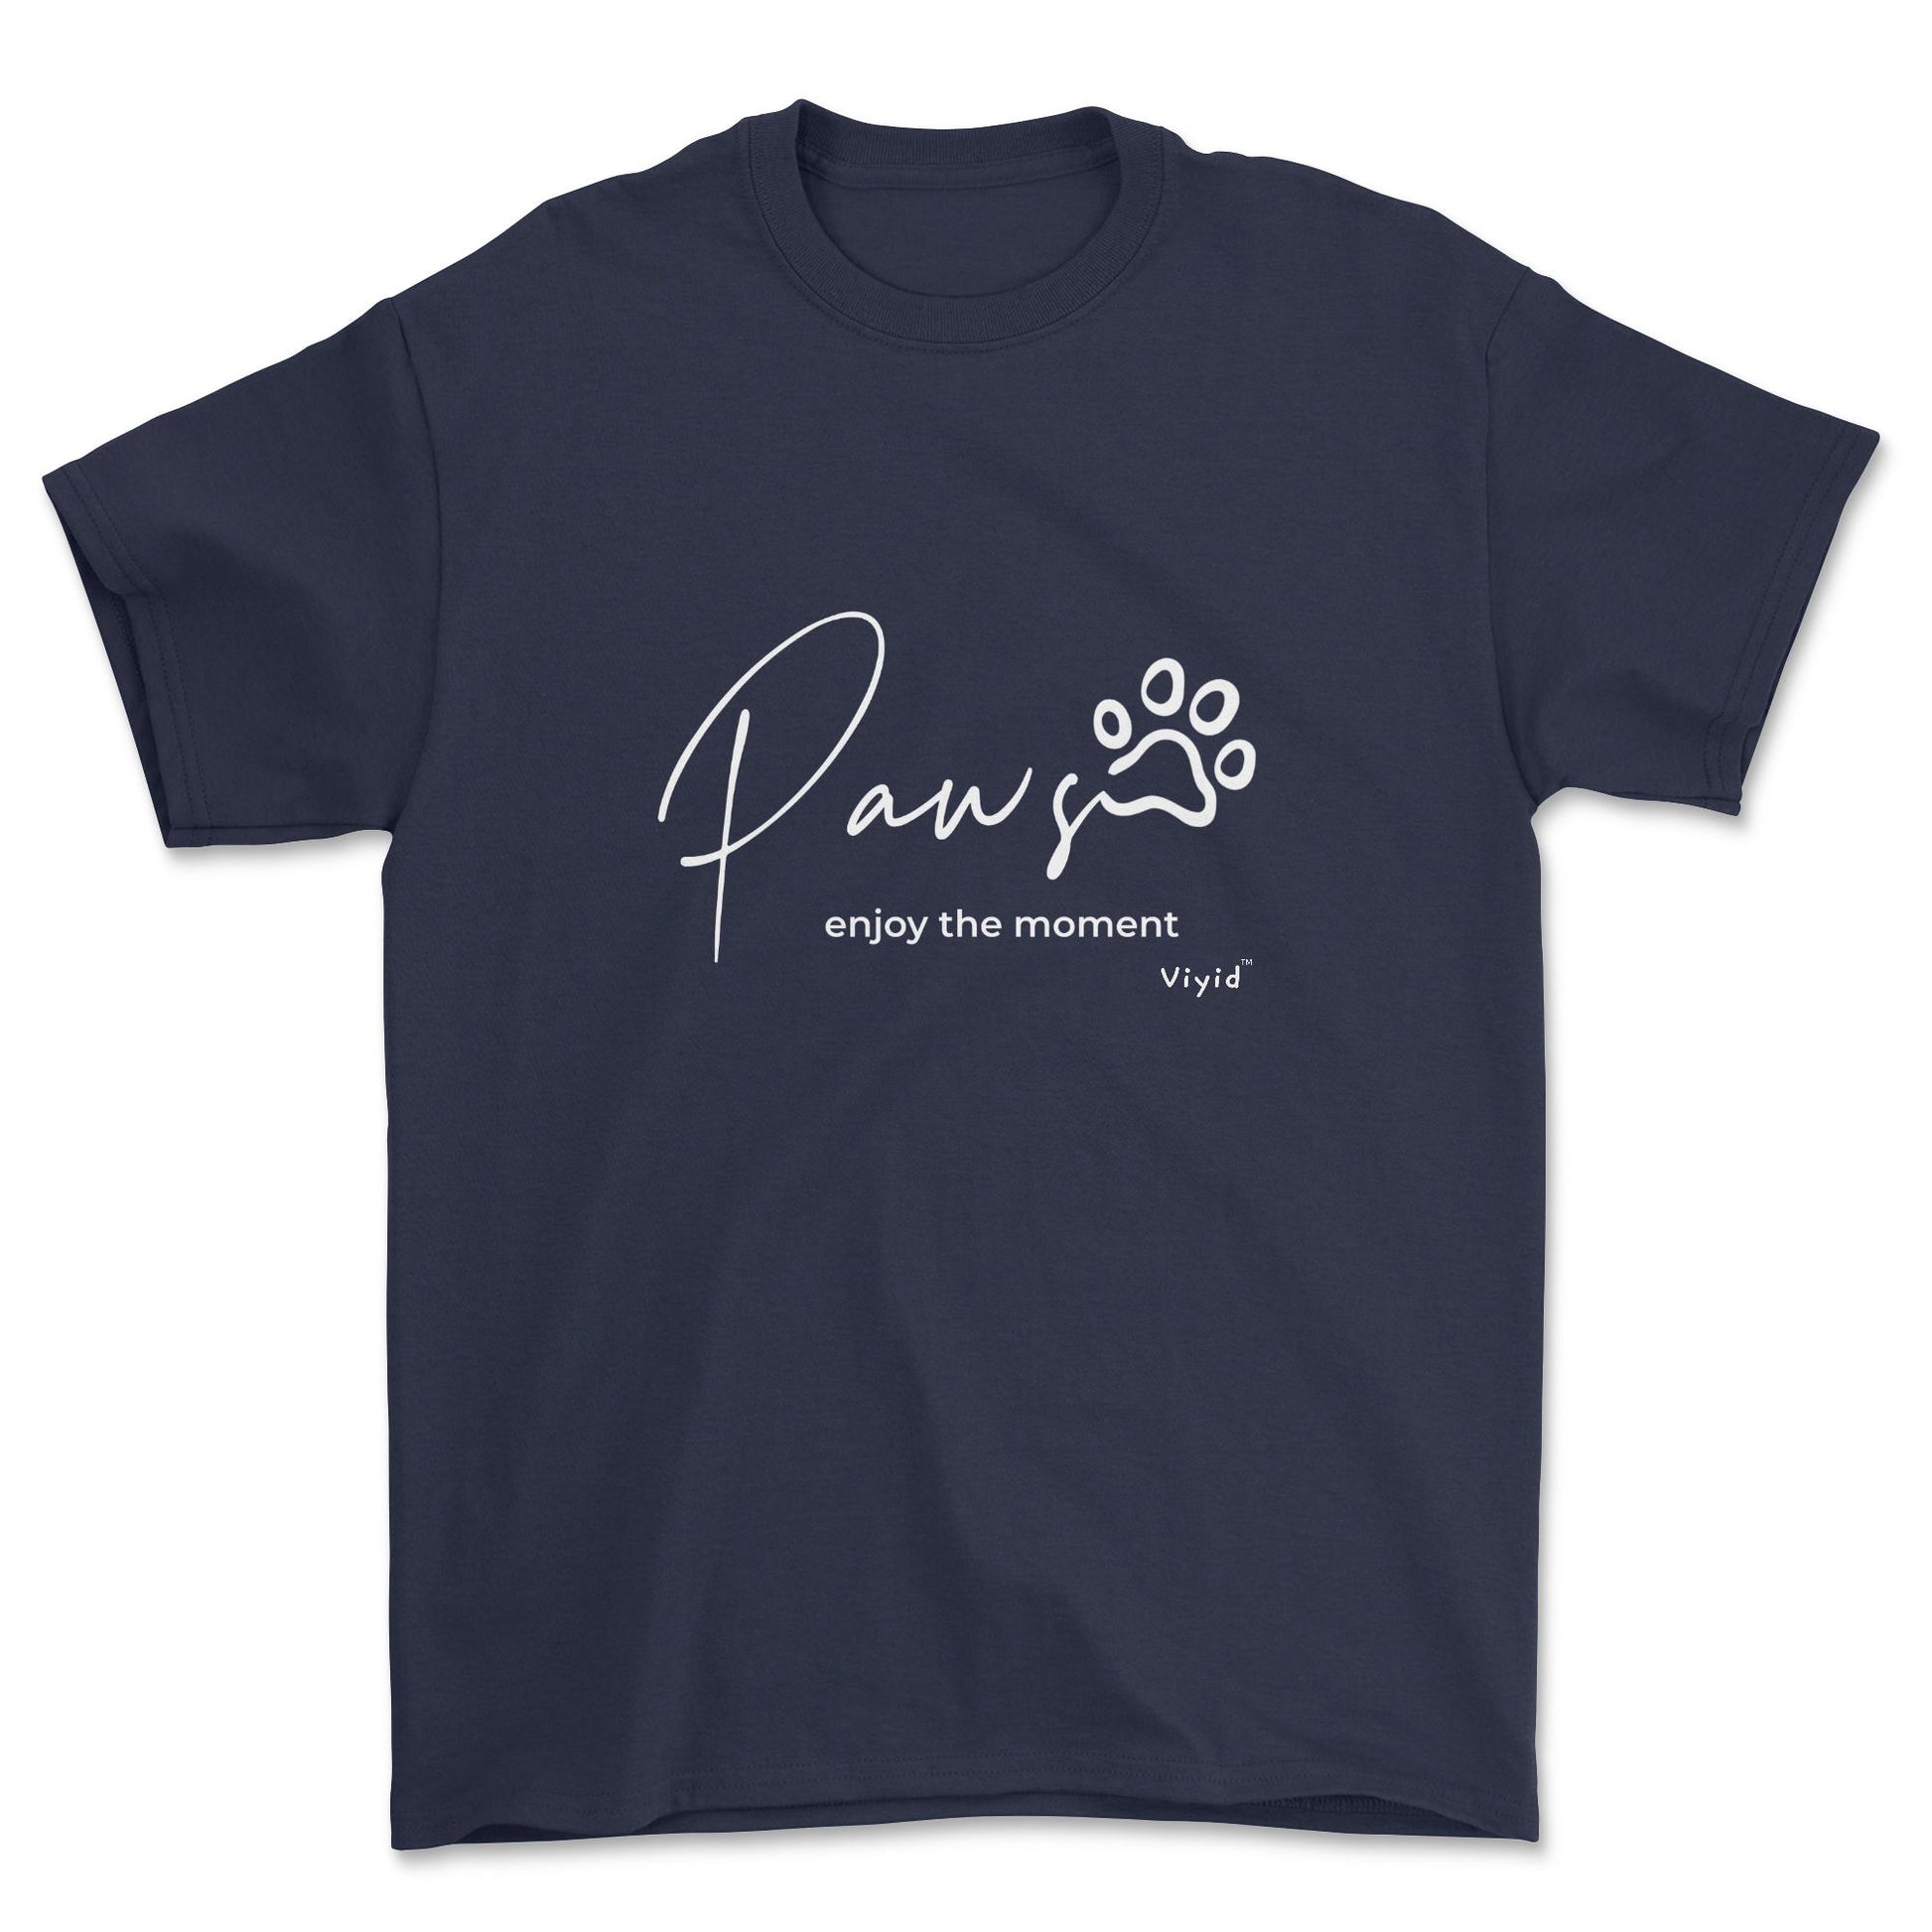 paws enjoy the moment adult t-shirt navy